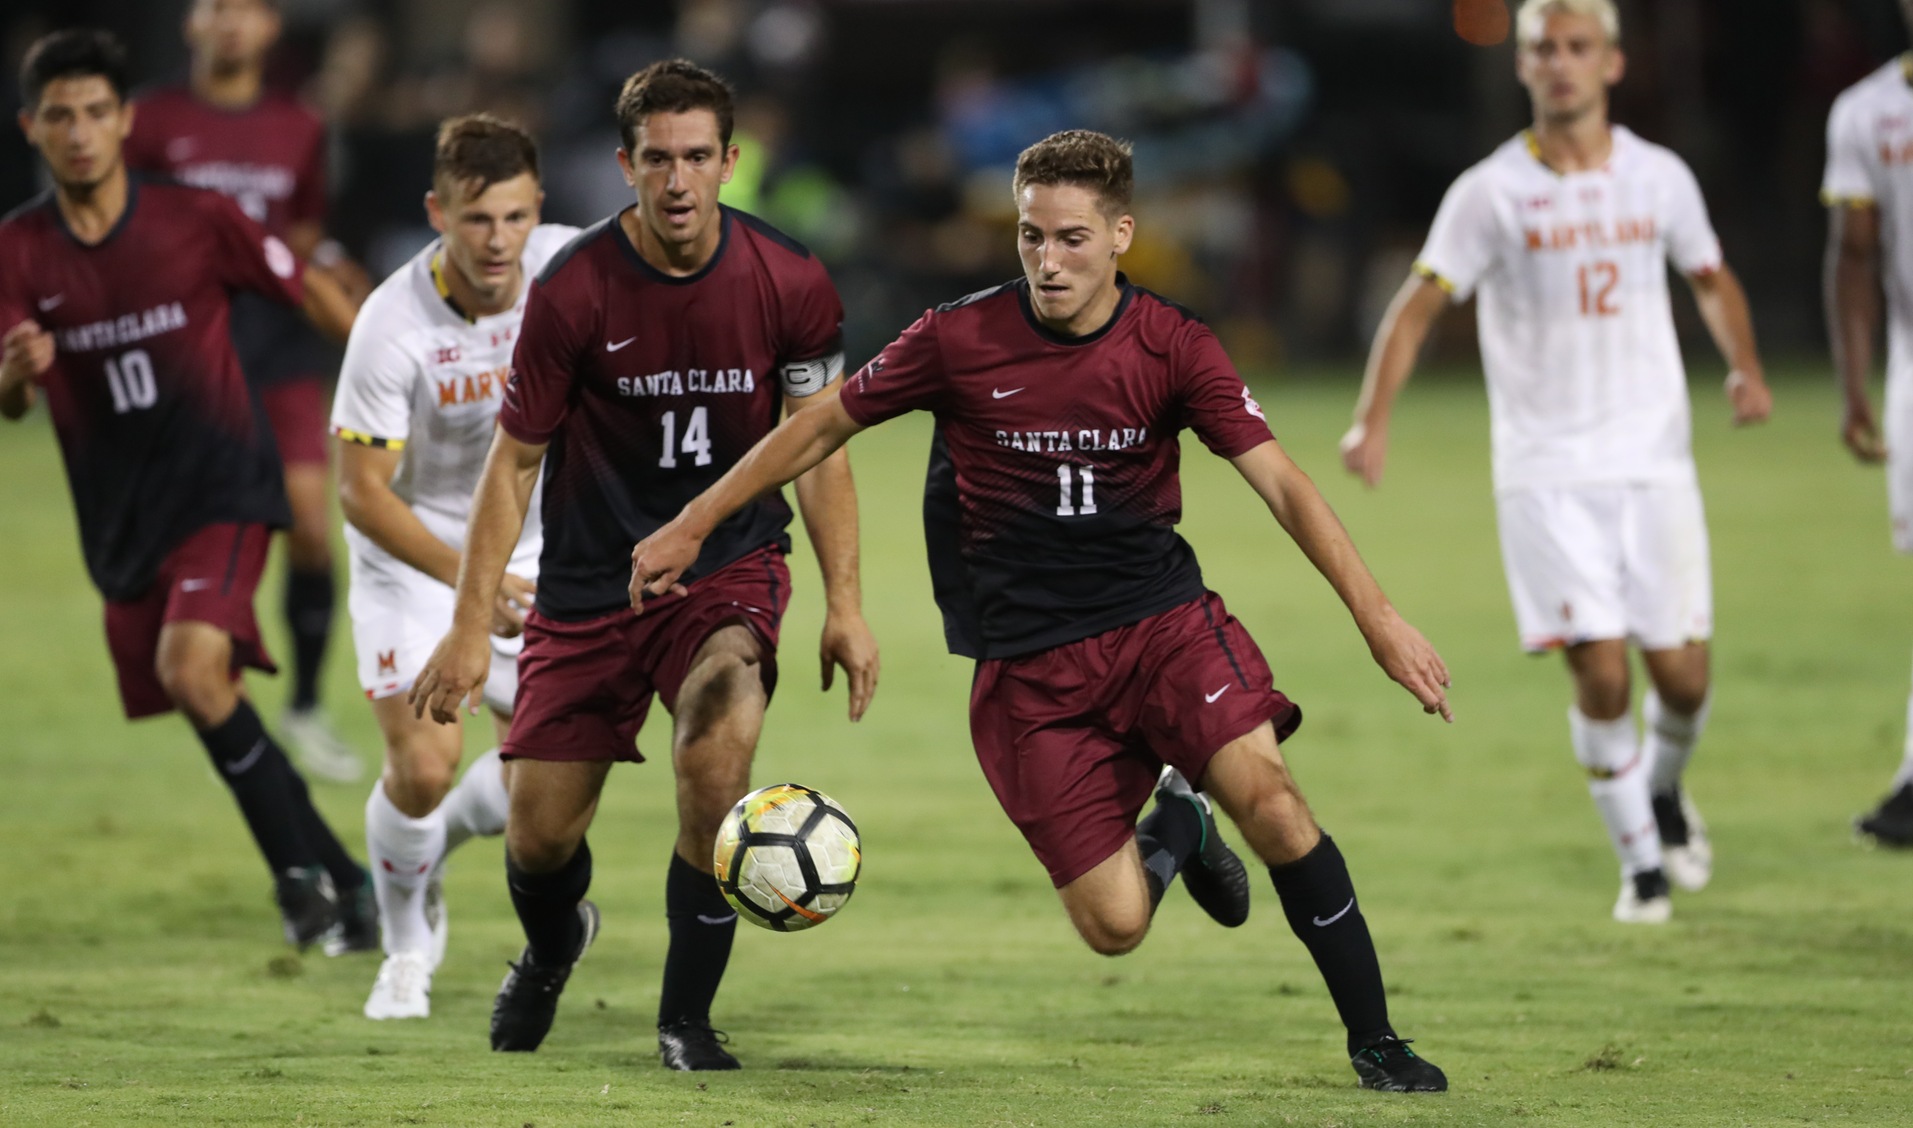 Men’s Soccer Downs Saint Mary’s To Improve To 2-0 In WCC Play